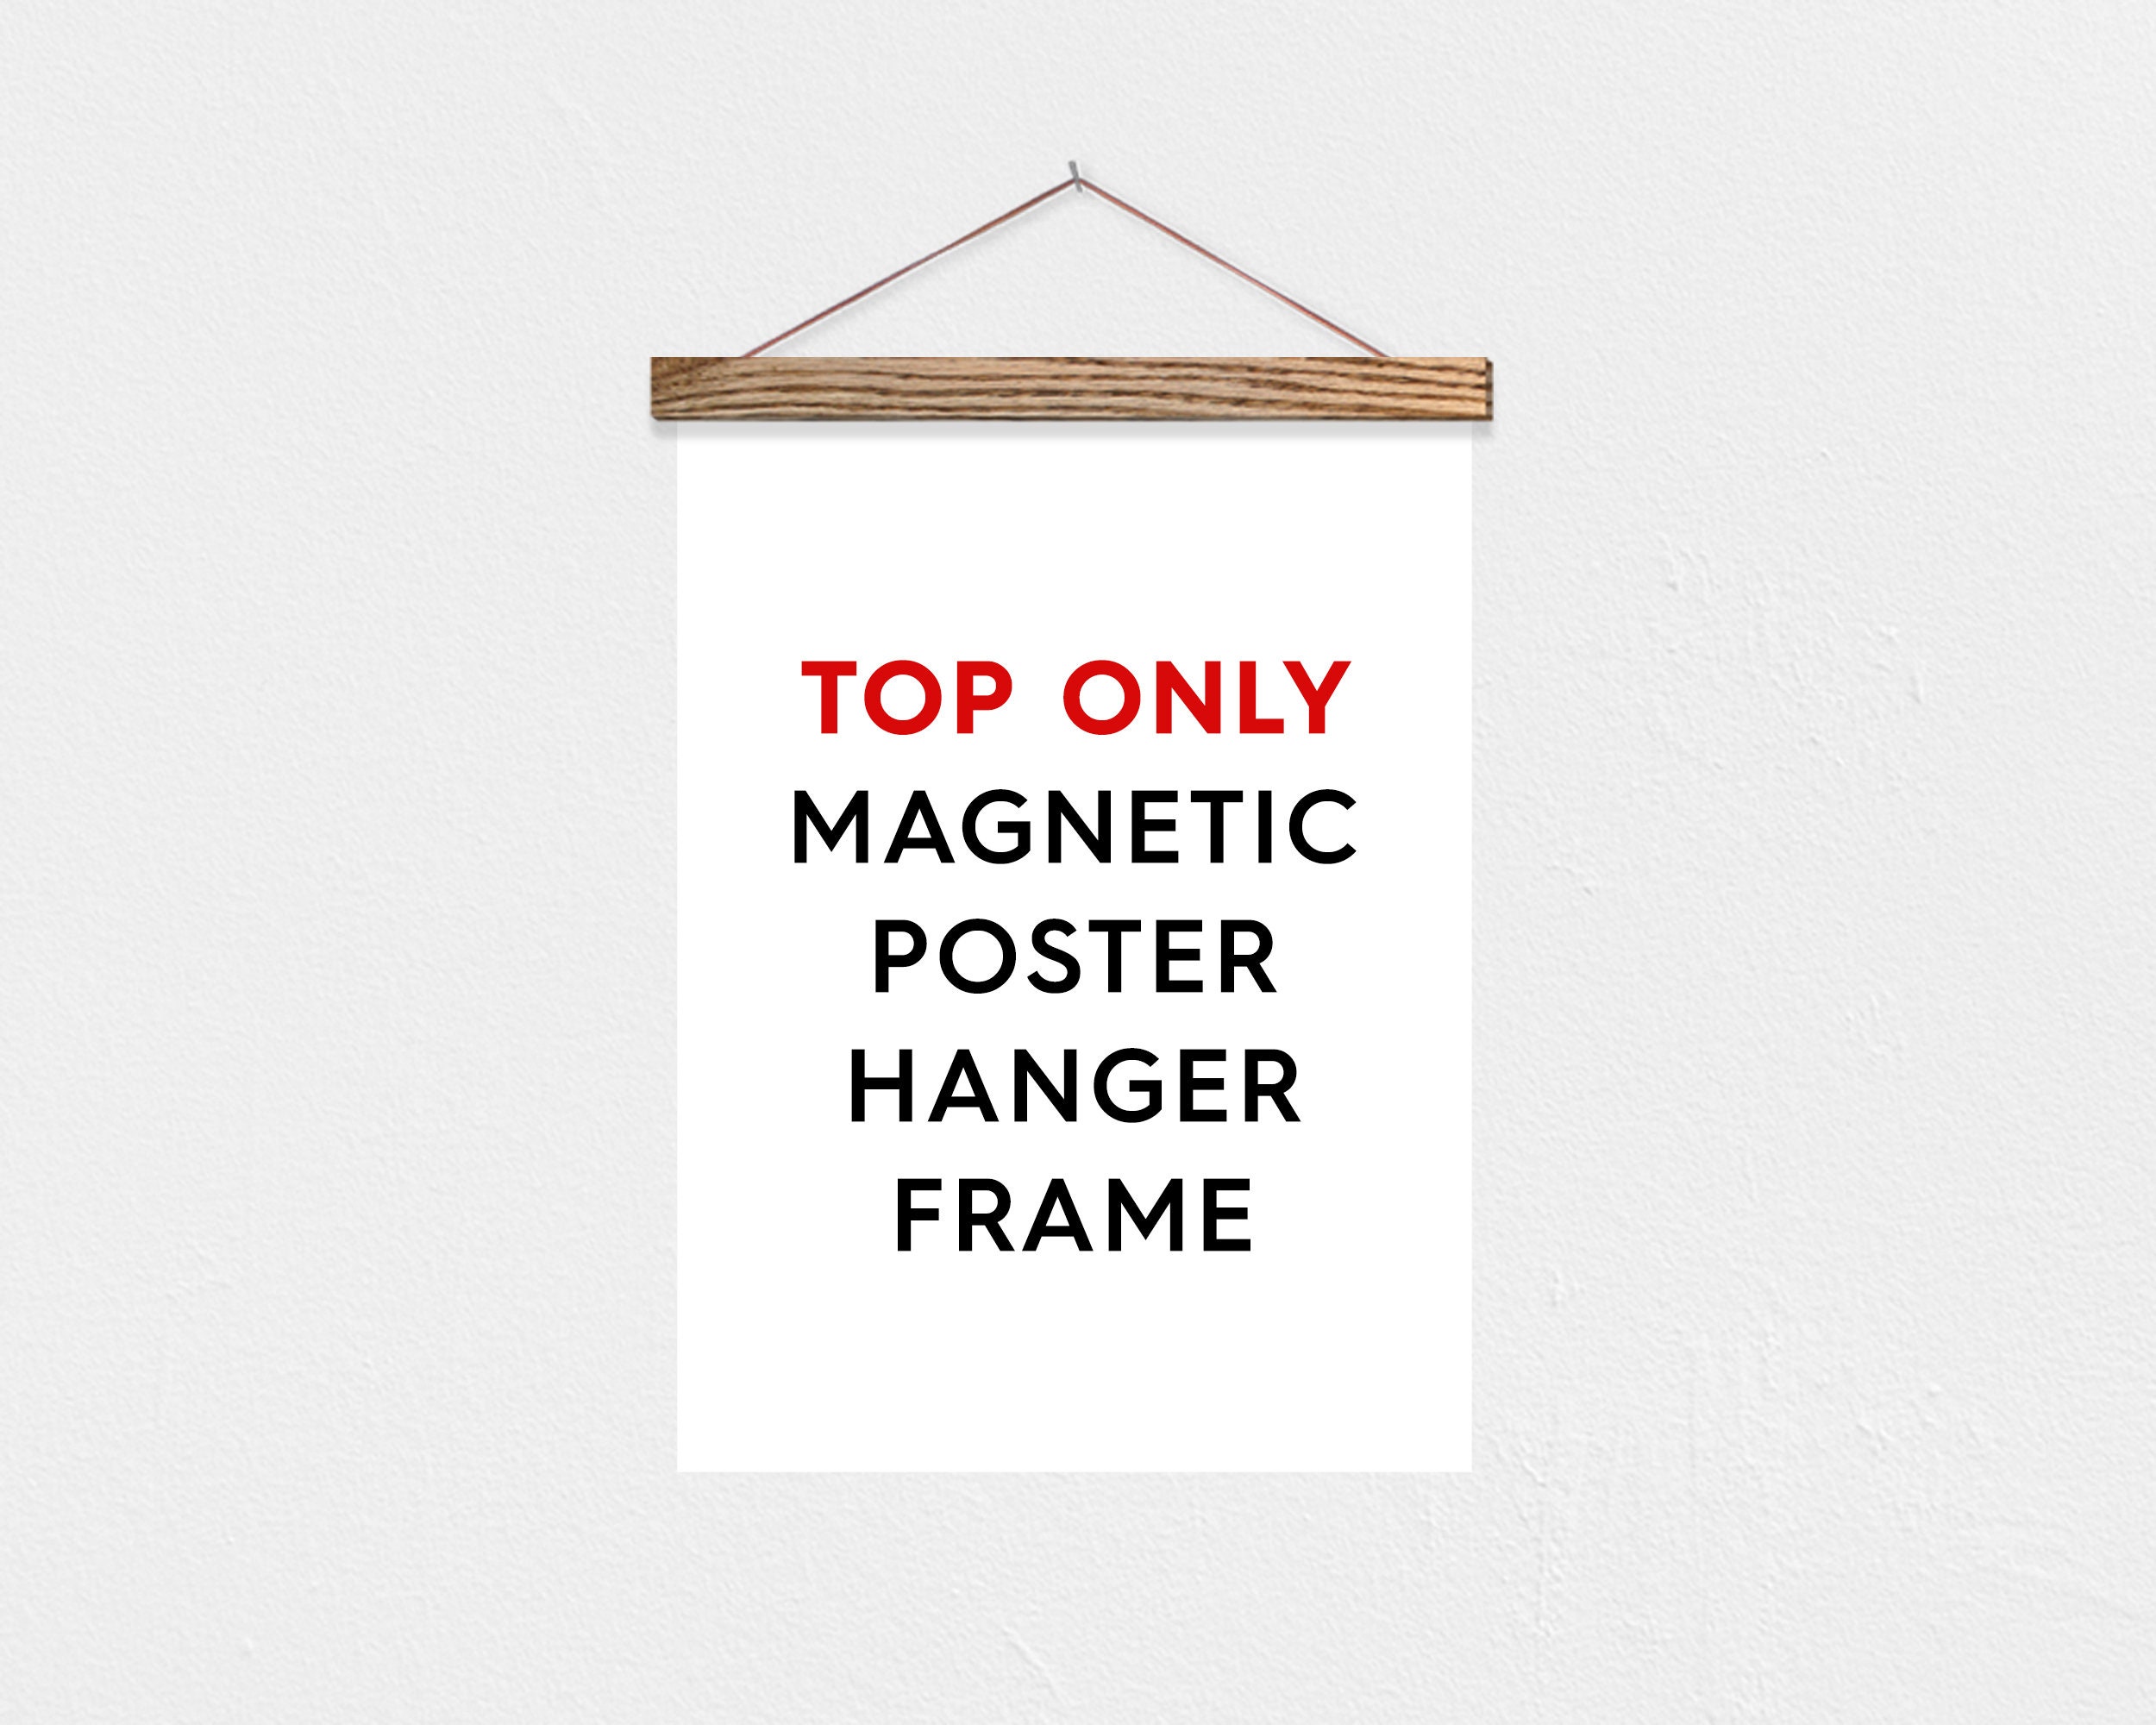 Hanger Frames -Solid Oak & Strong Magnets - All Sizes & 6 Stain Colors